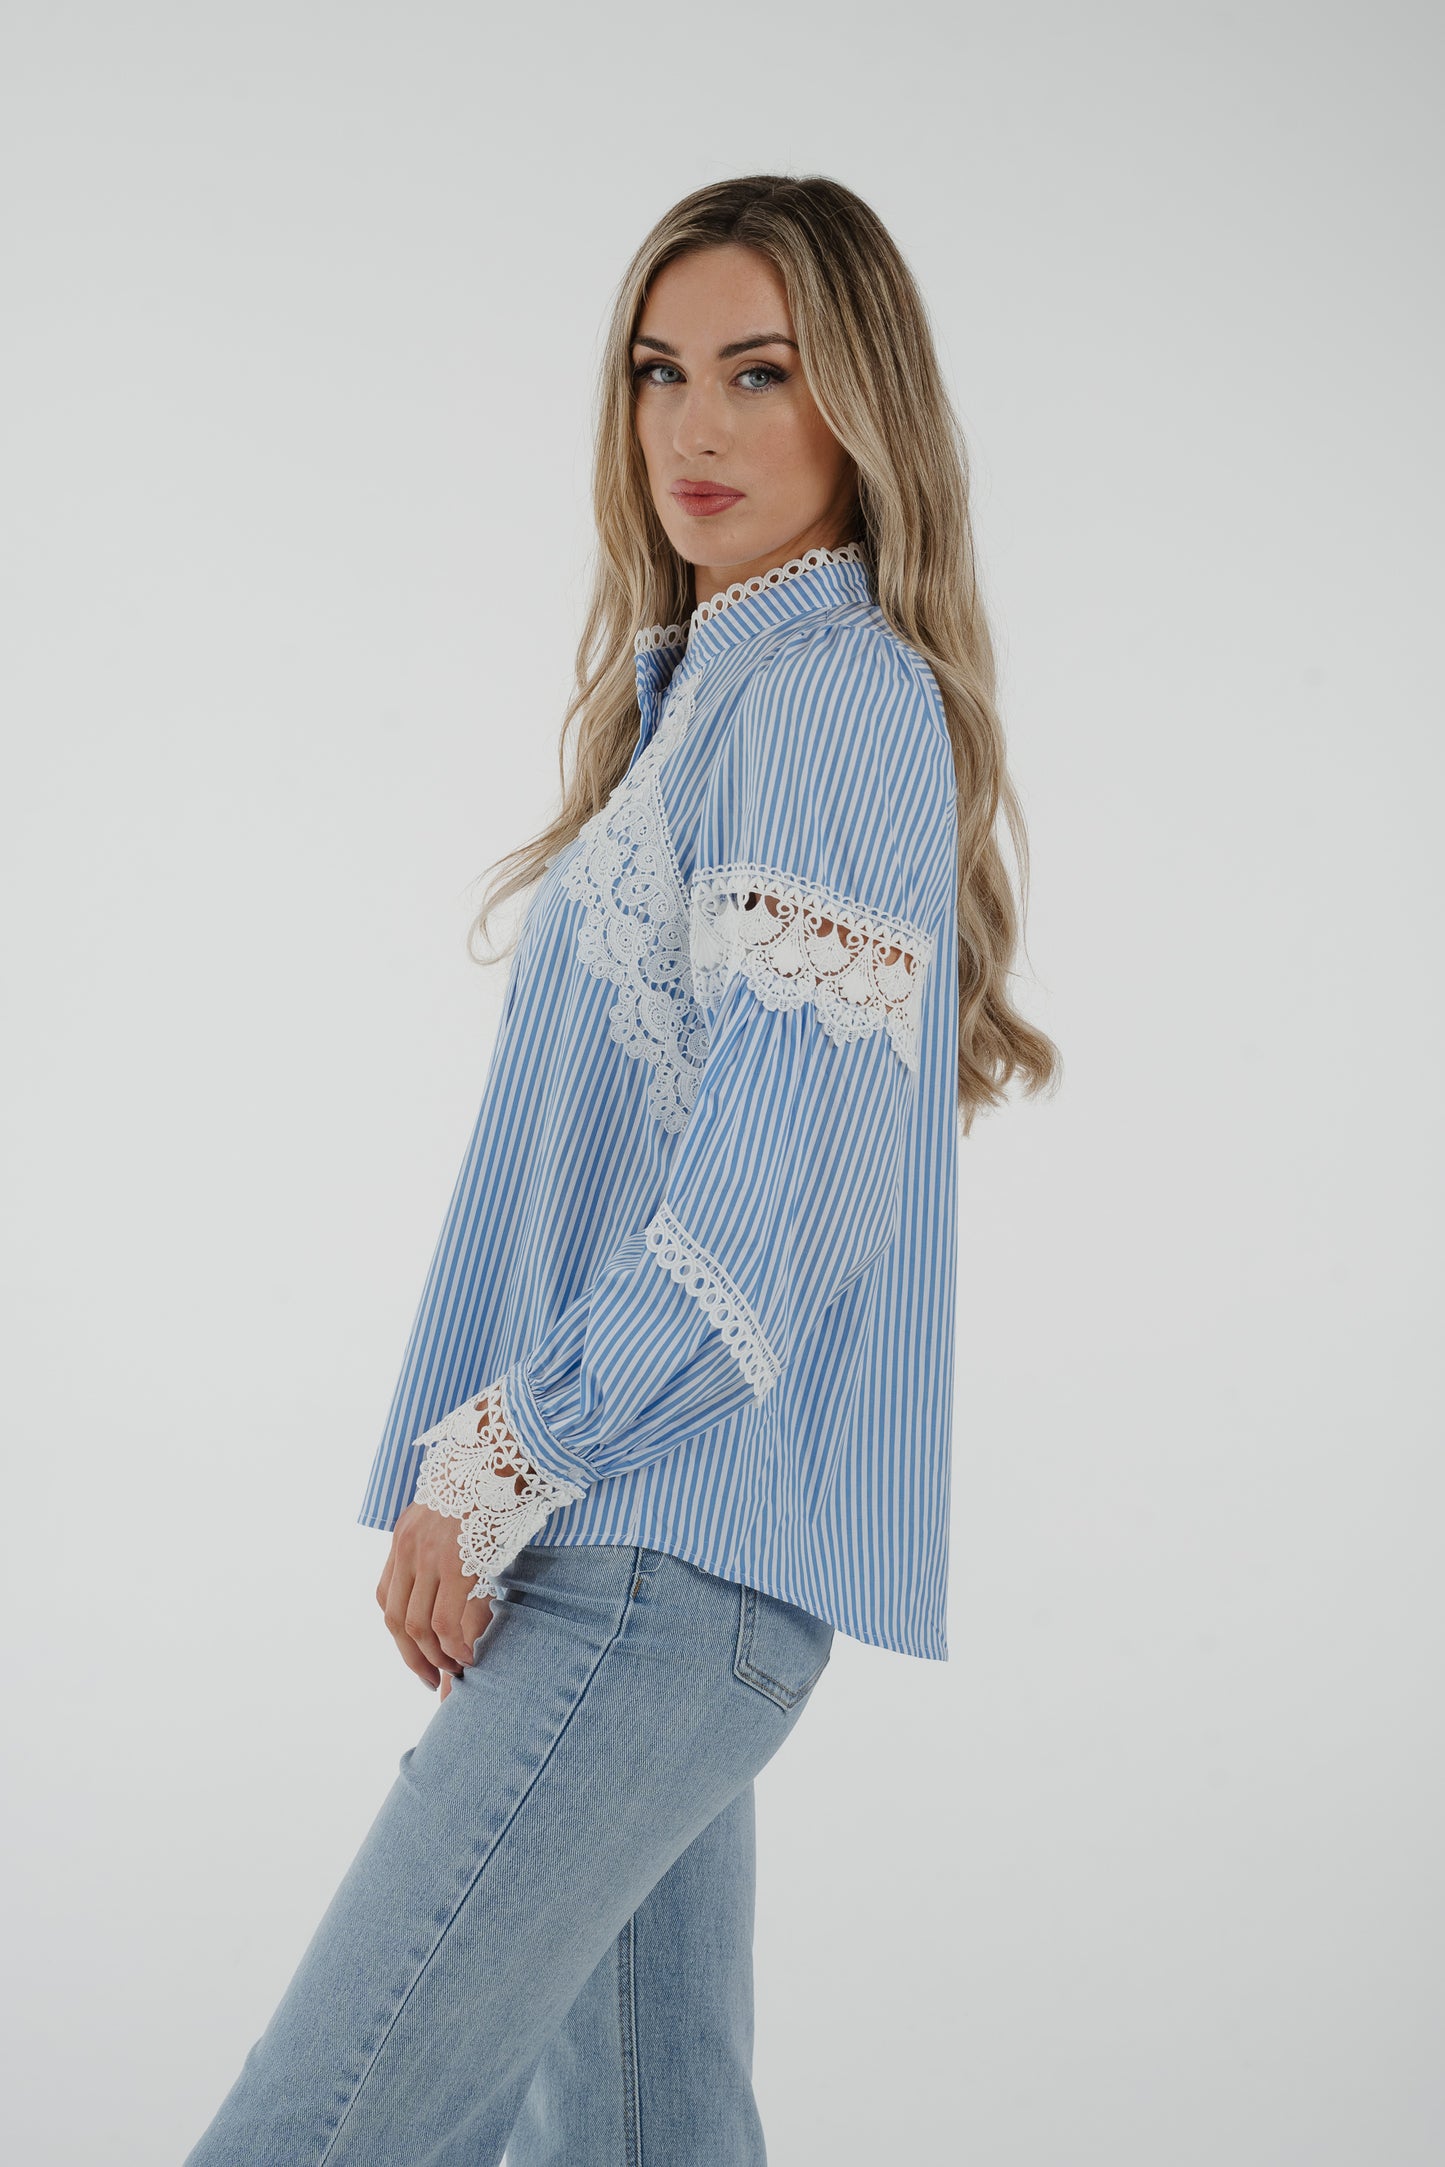 Holly Lace Detail Shirt In Blue Stripe